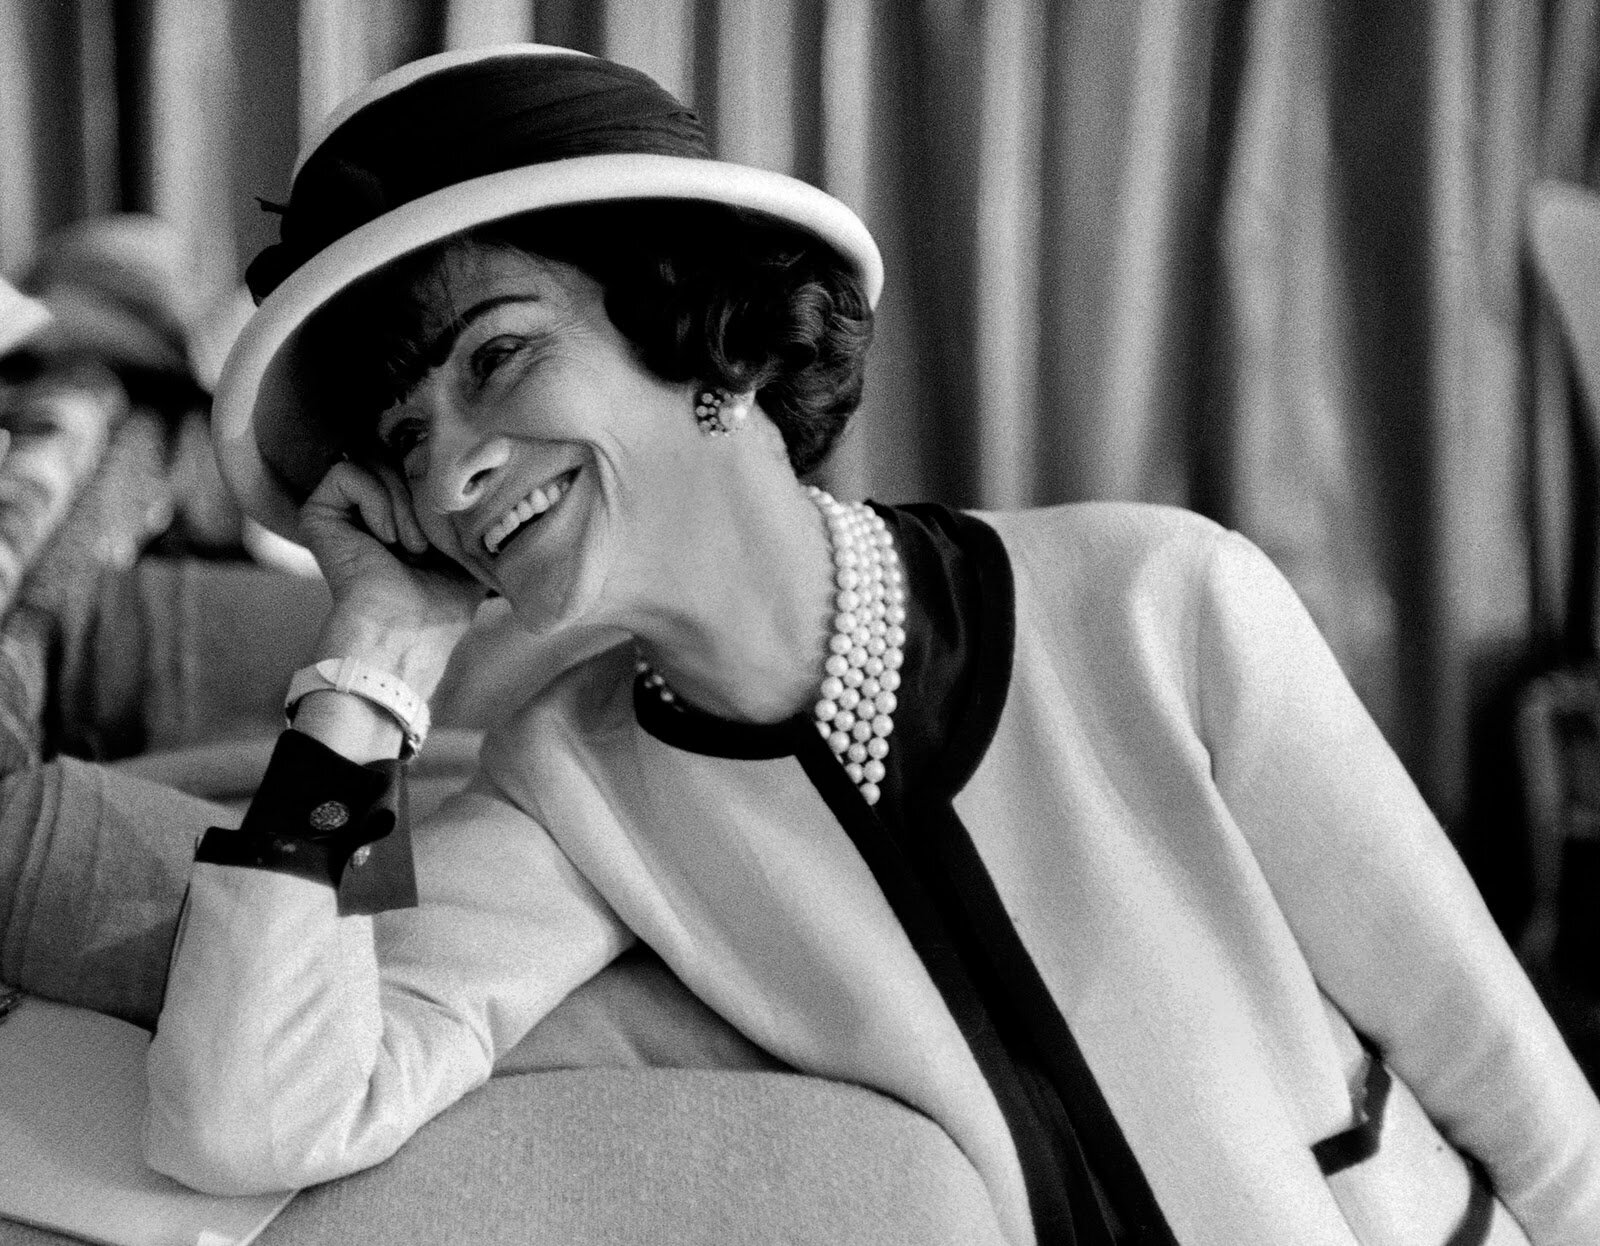 Coco Chanel was a major contributor to the Harlem